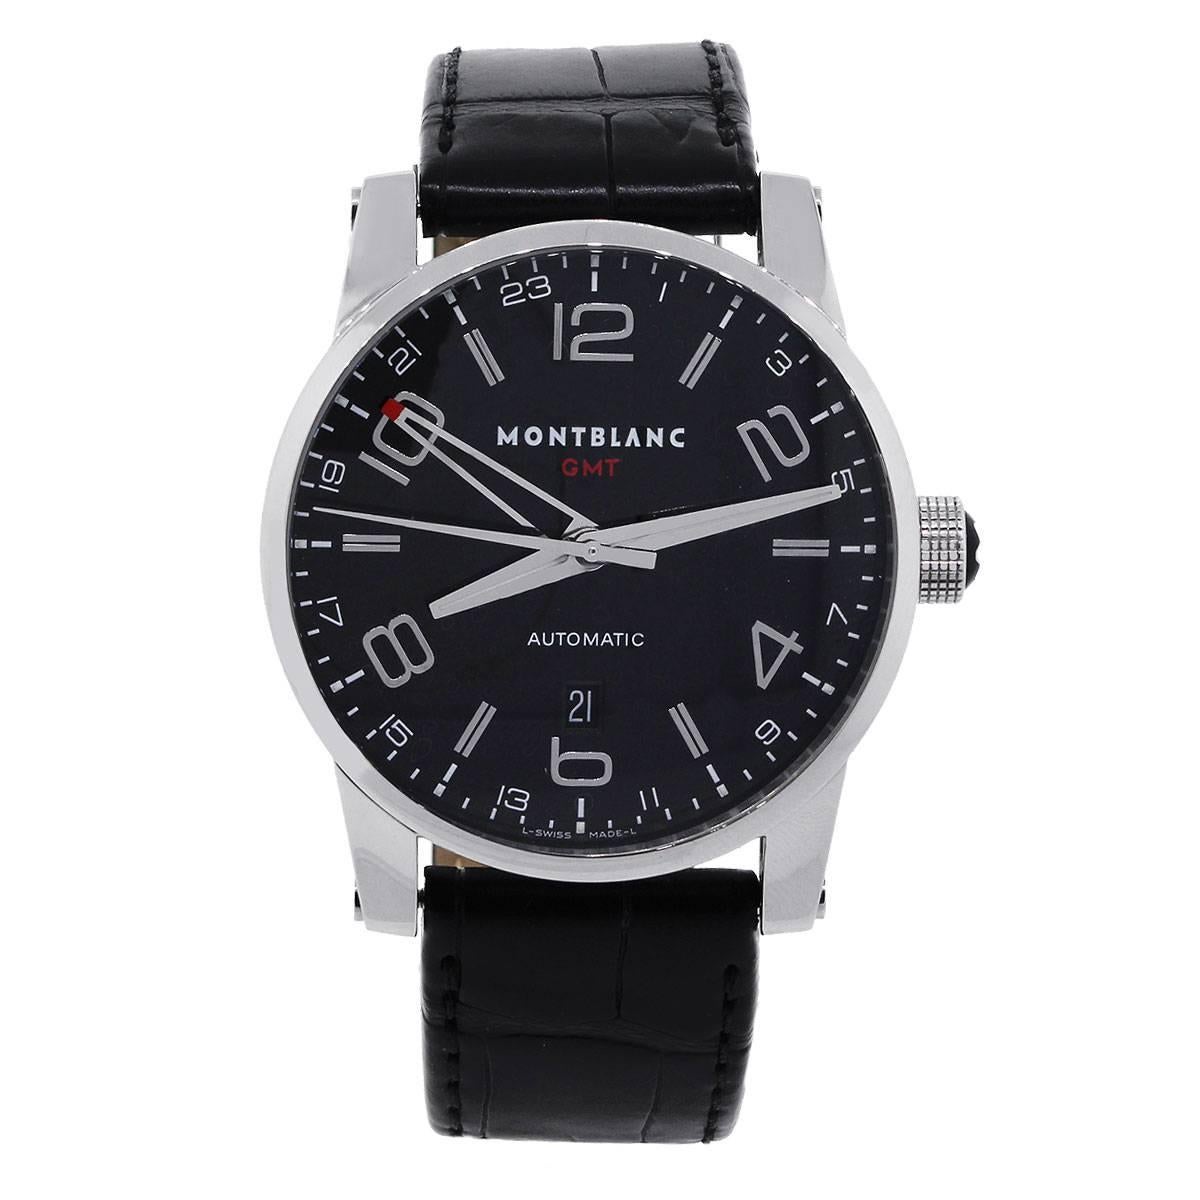 Montblanc Stainless Steel Timewalker GTM Automatic Wristwatch